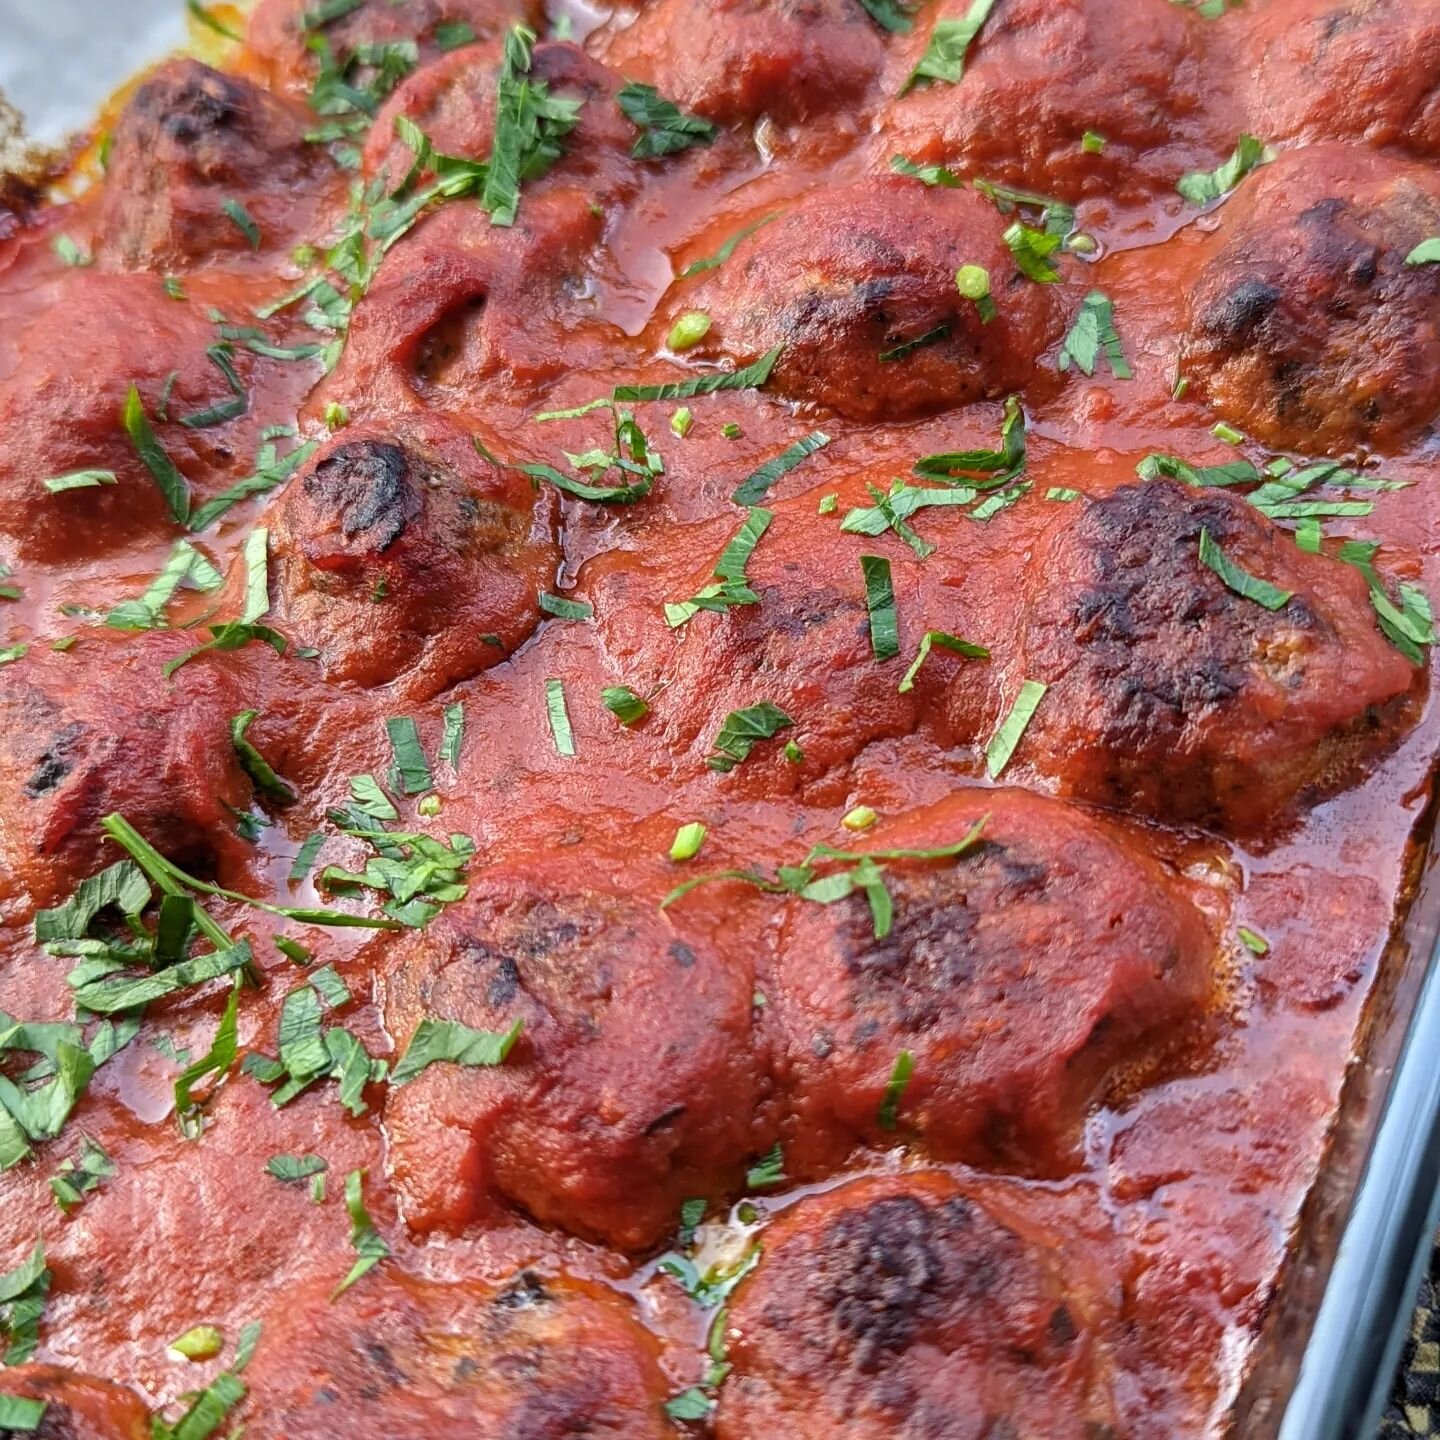 Spanish style baked albondigas or meatballs.  Strong paprika flavored roasted tomato sauce.
&bull;
&bull;
MK Culinary | 401-374-5381 | Chef Mikey
&bull;
&bull;
#MKCulinary #MKCulinaryChicago #YesHaveSome #ChefMikey #ChicagoCateter #CustomMenus #Inver